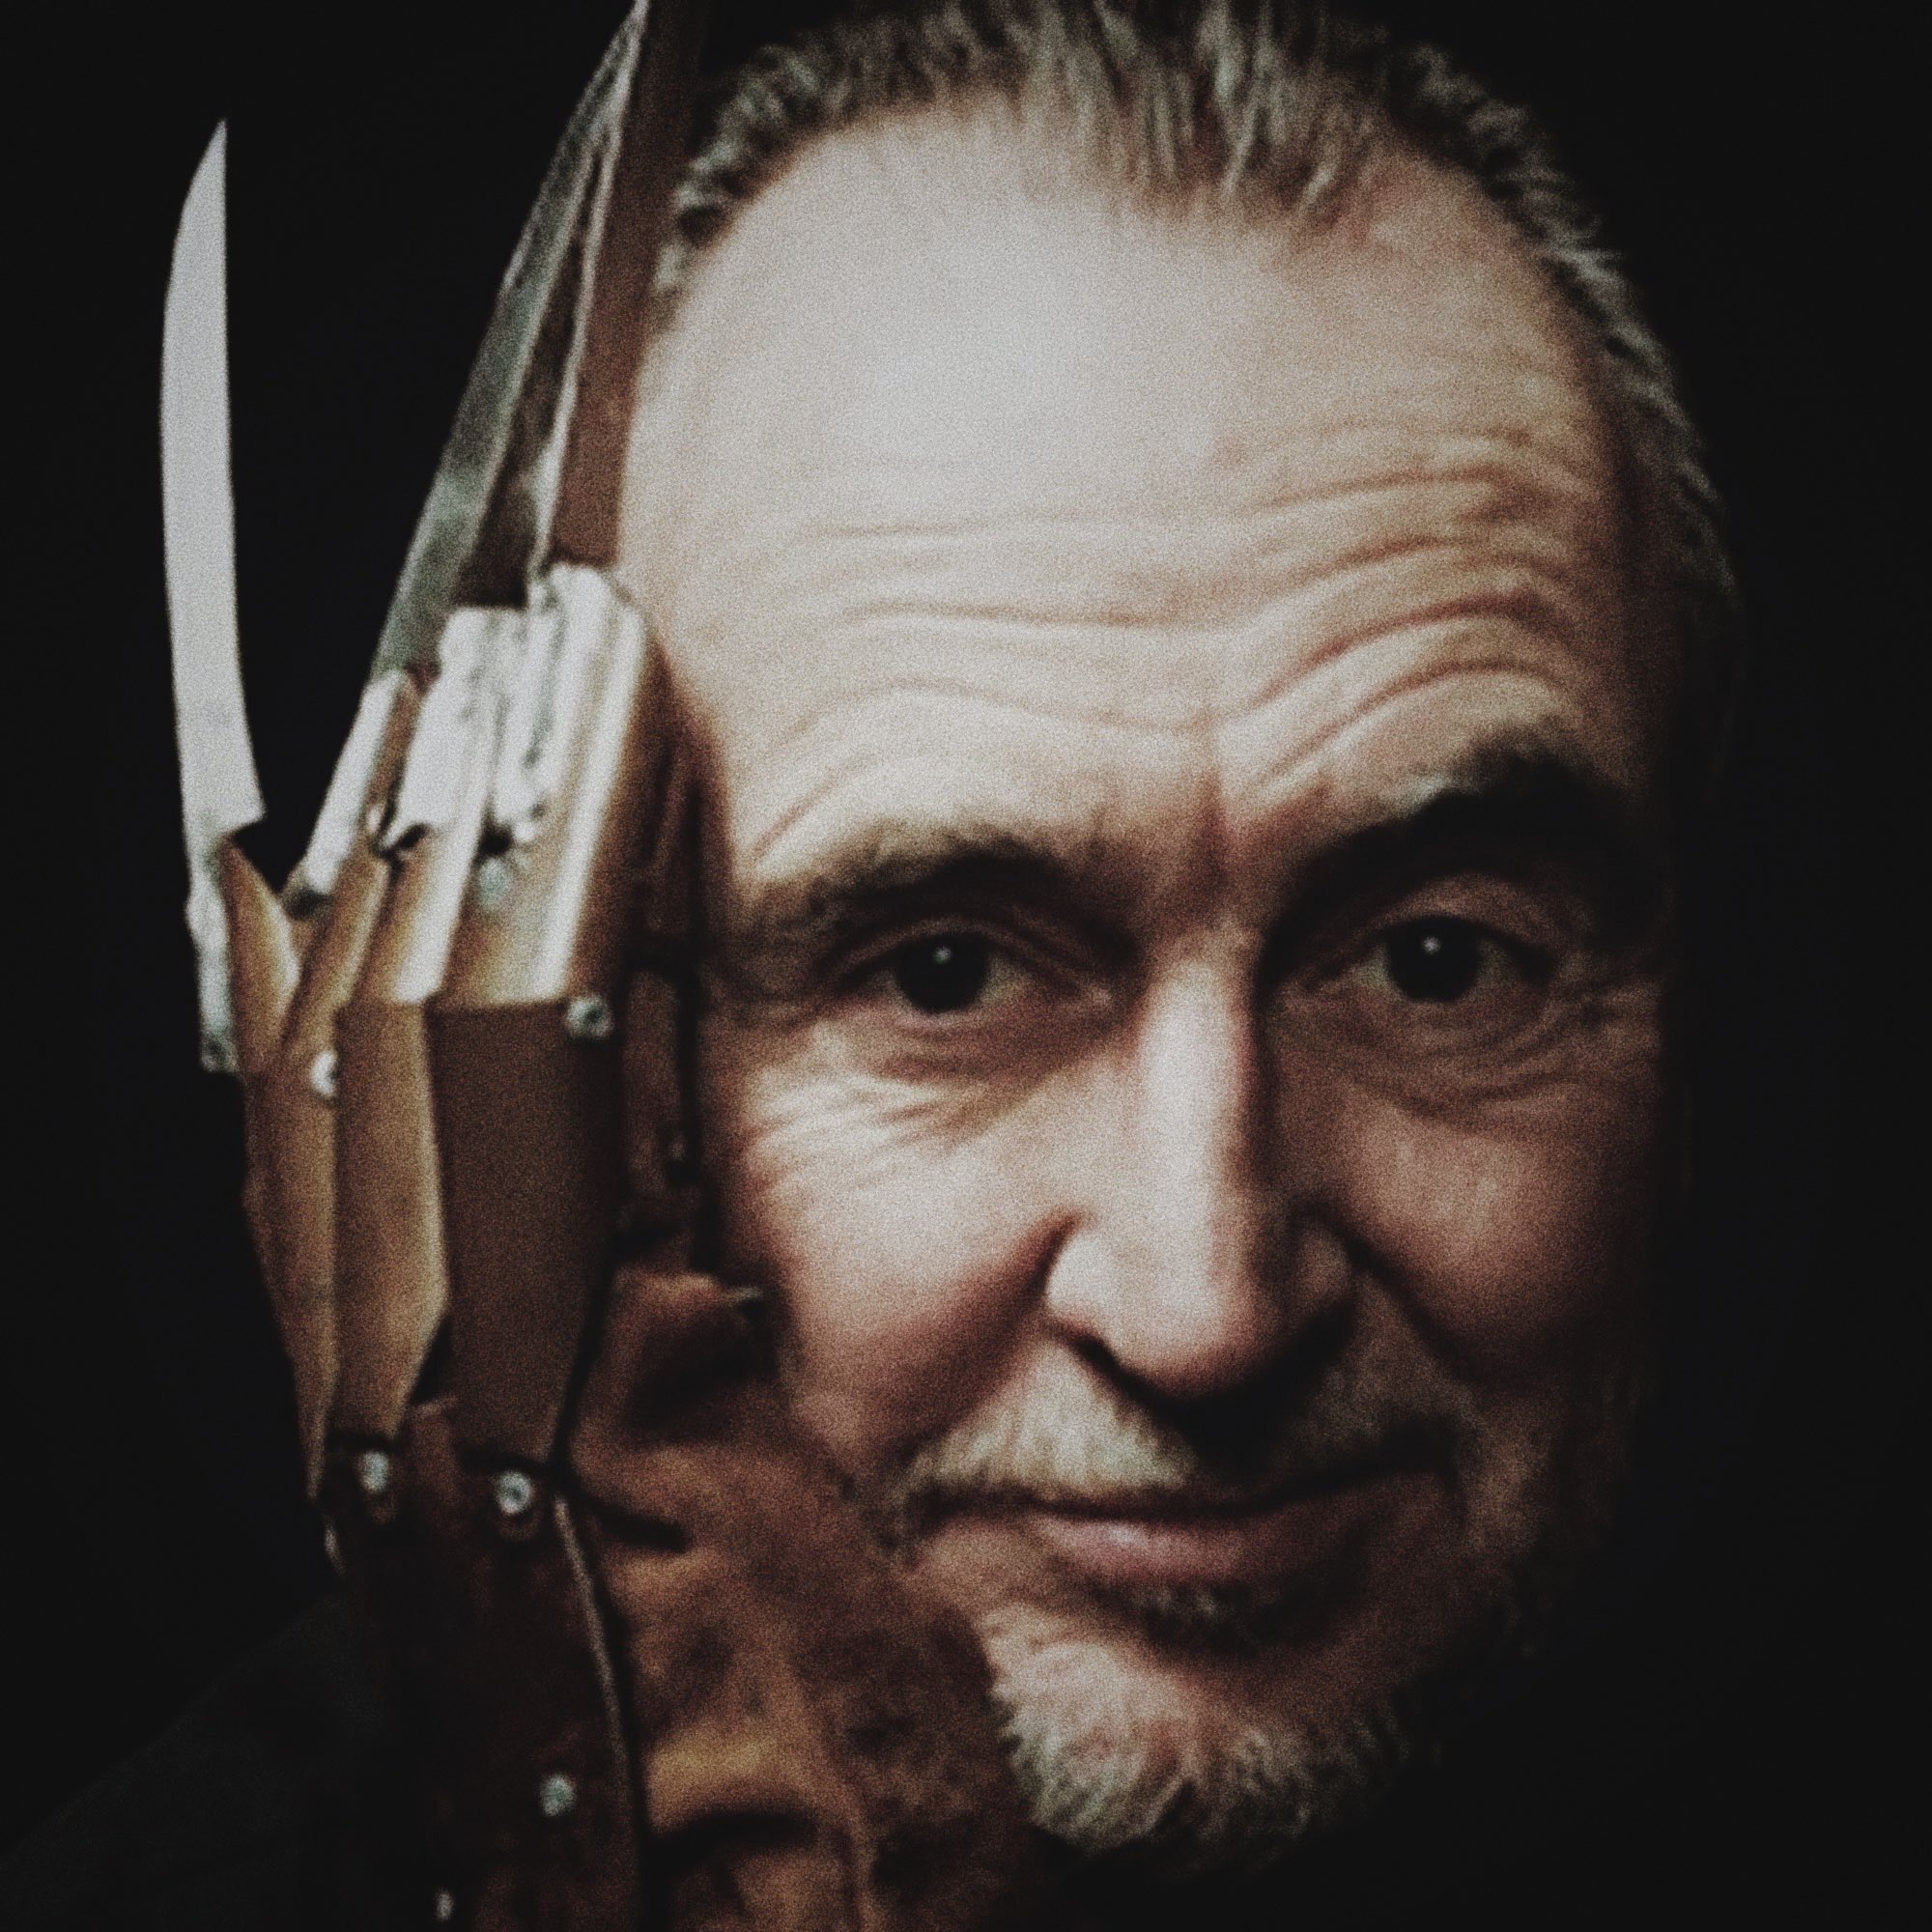 Happy birthday to one of my favorite people ever, wes craven. you will live forever in horror. love you 